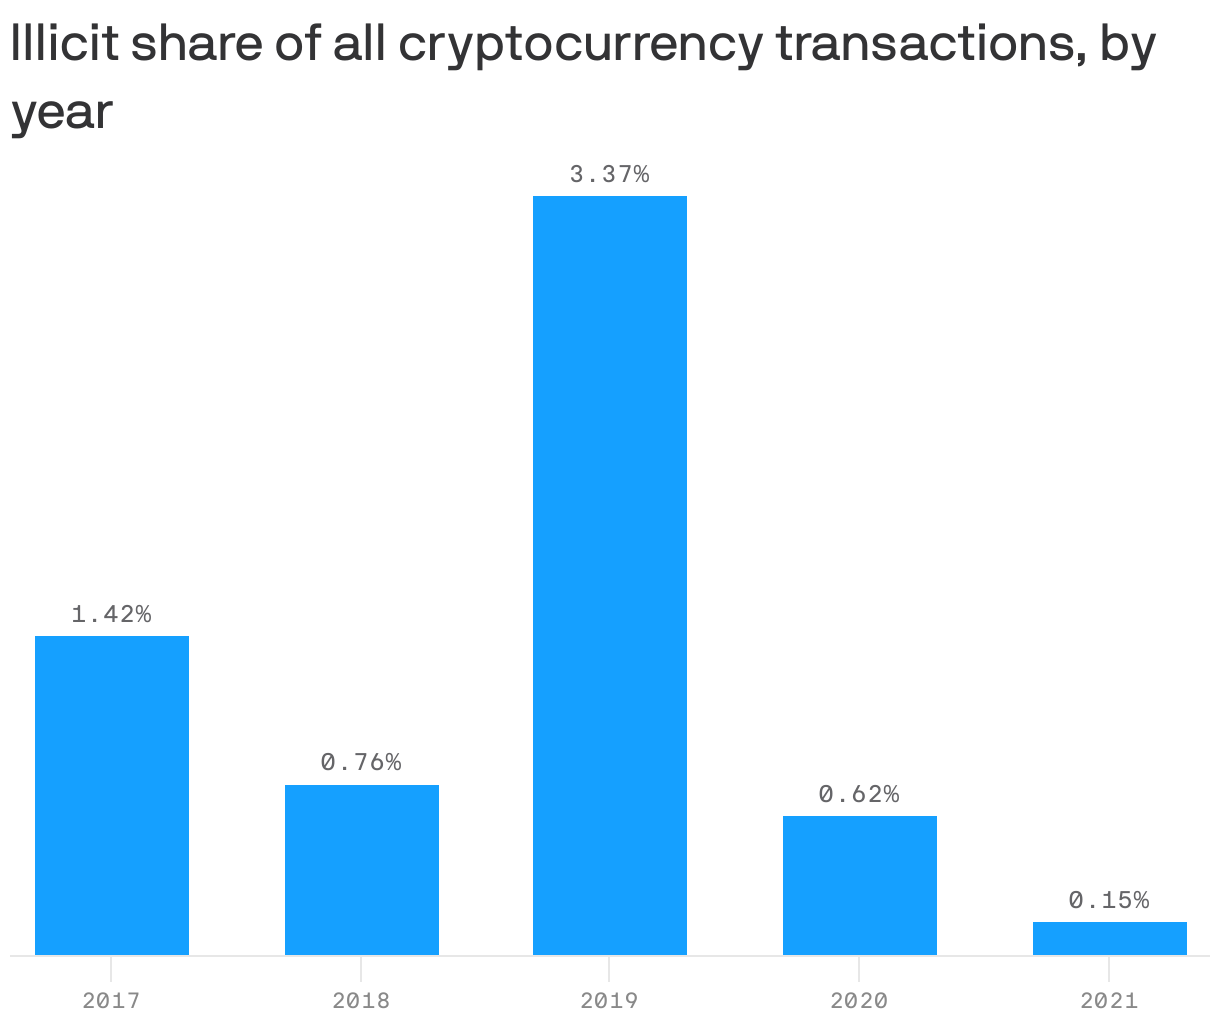 Illicit share of all cryptocurrency transactions, by year